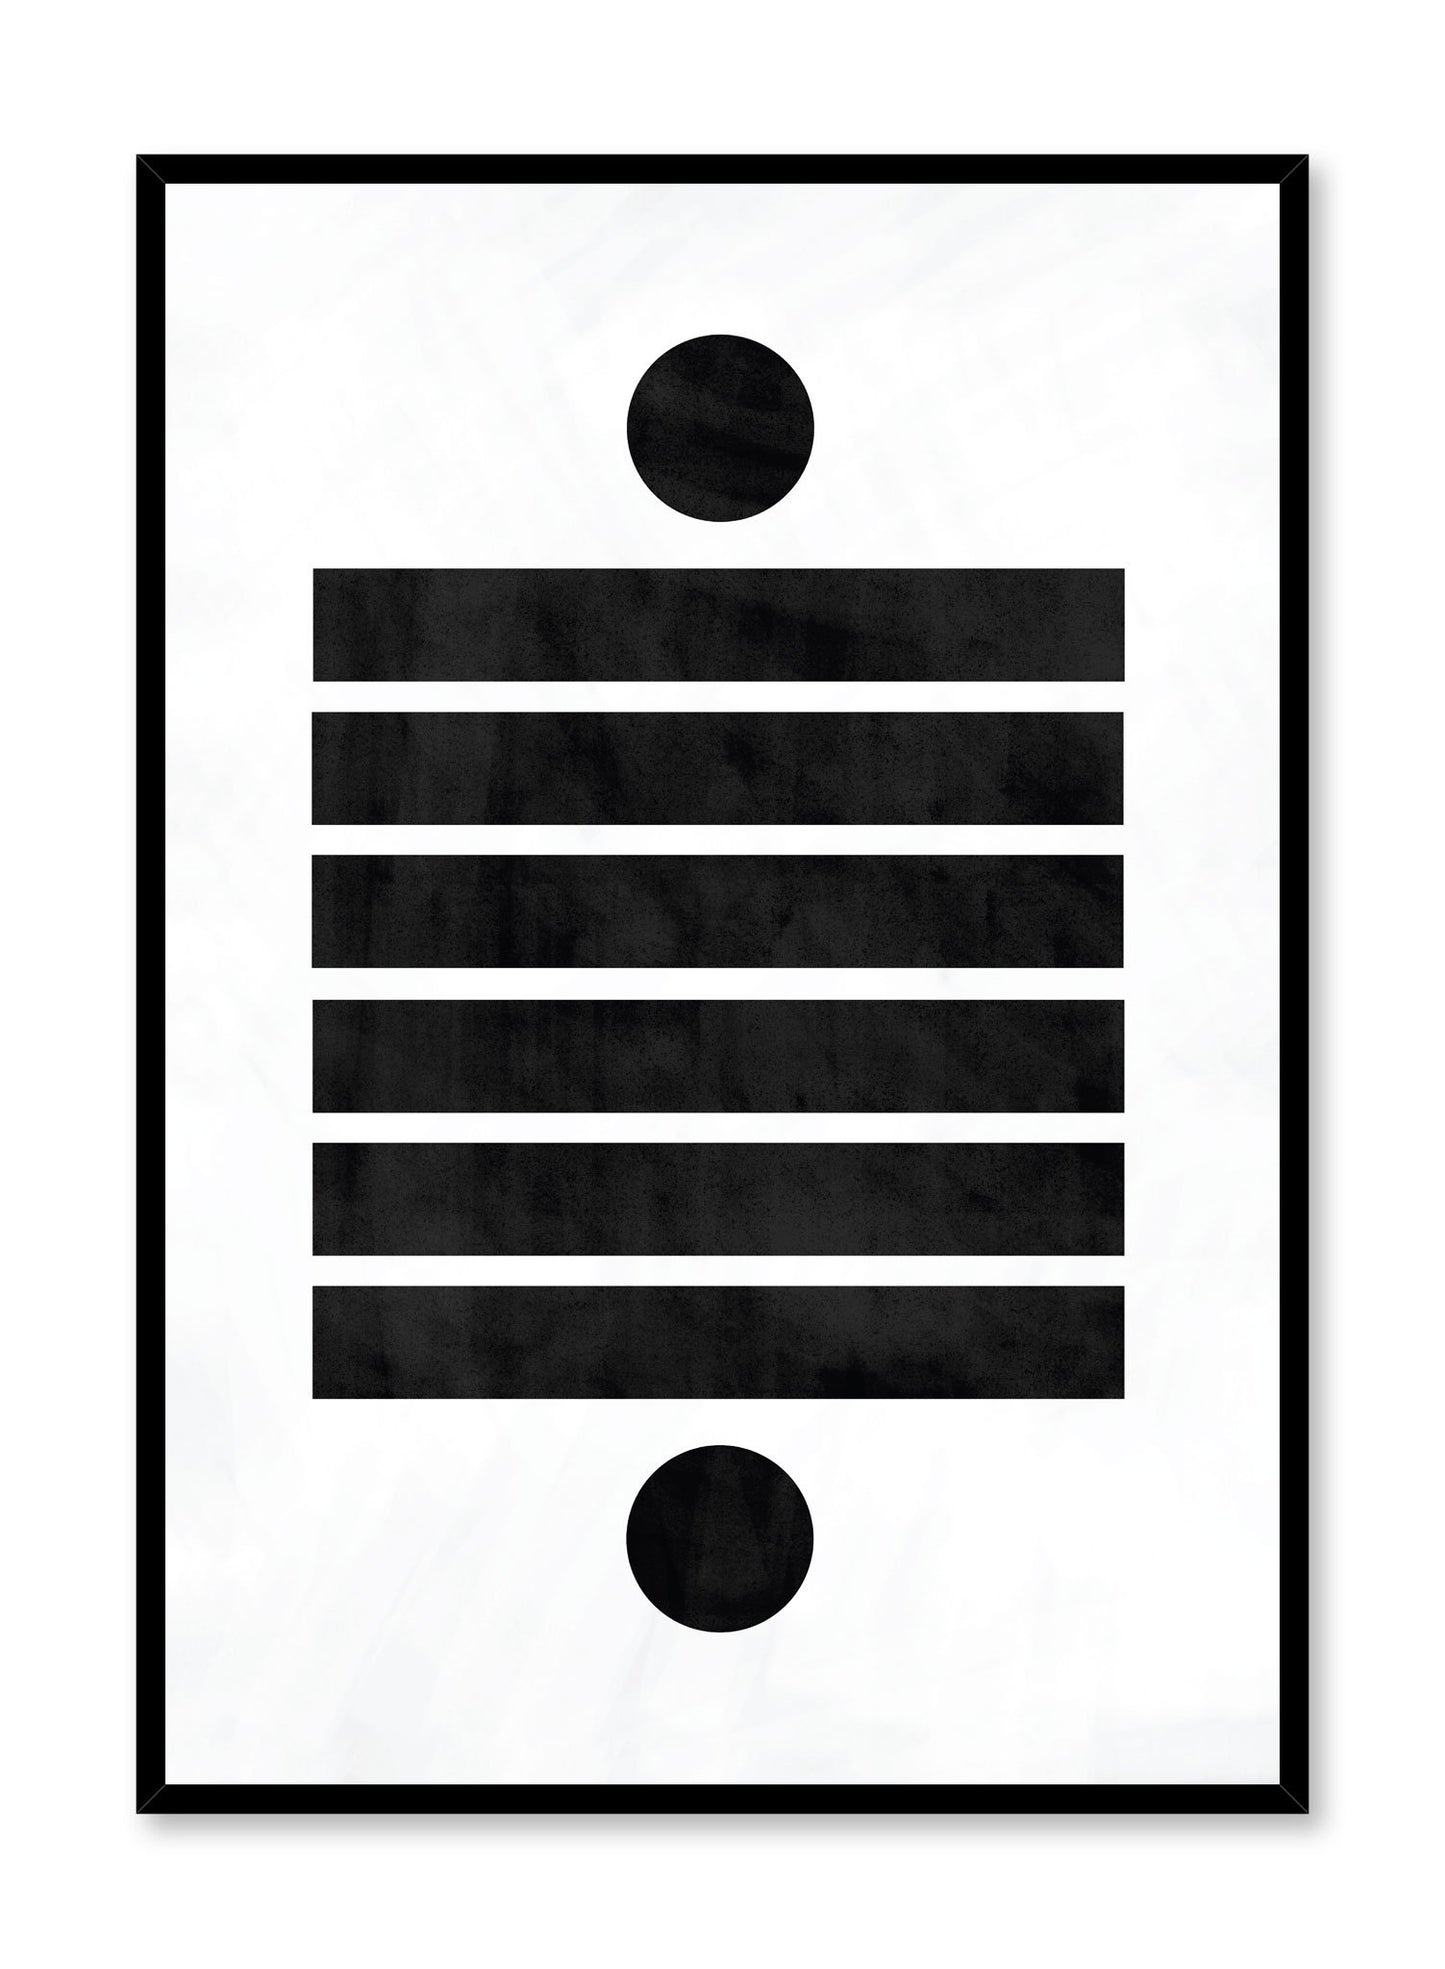 Modern minimalist poster by Opposite Wall with abstract design of Dominos by Toffie Affichiste